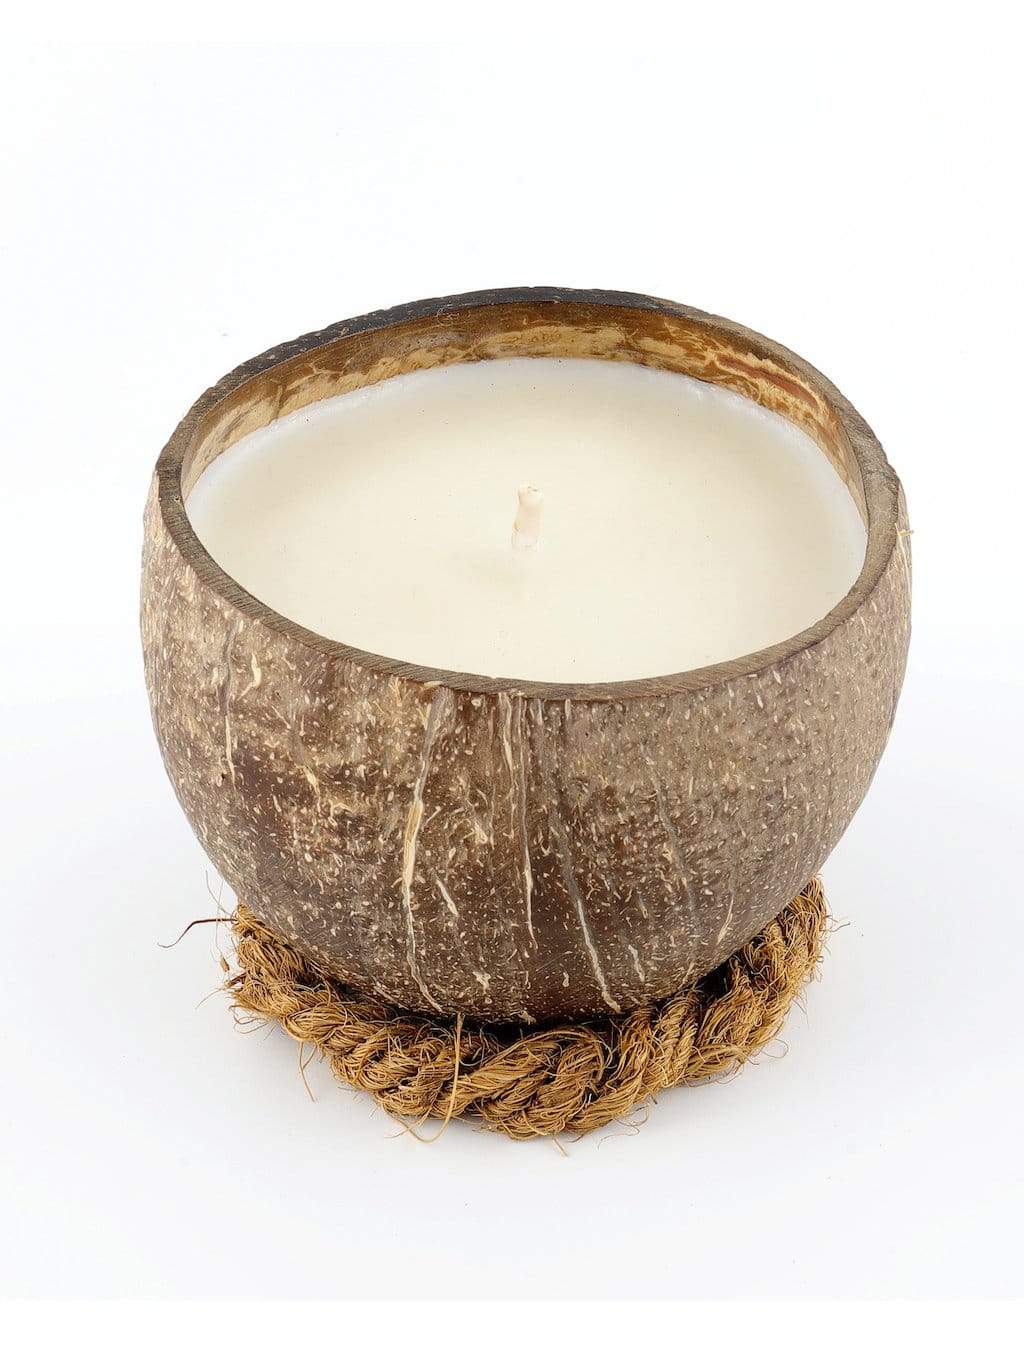 Coconut shell soy candles - Coco Candle Co